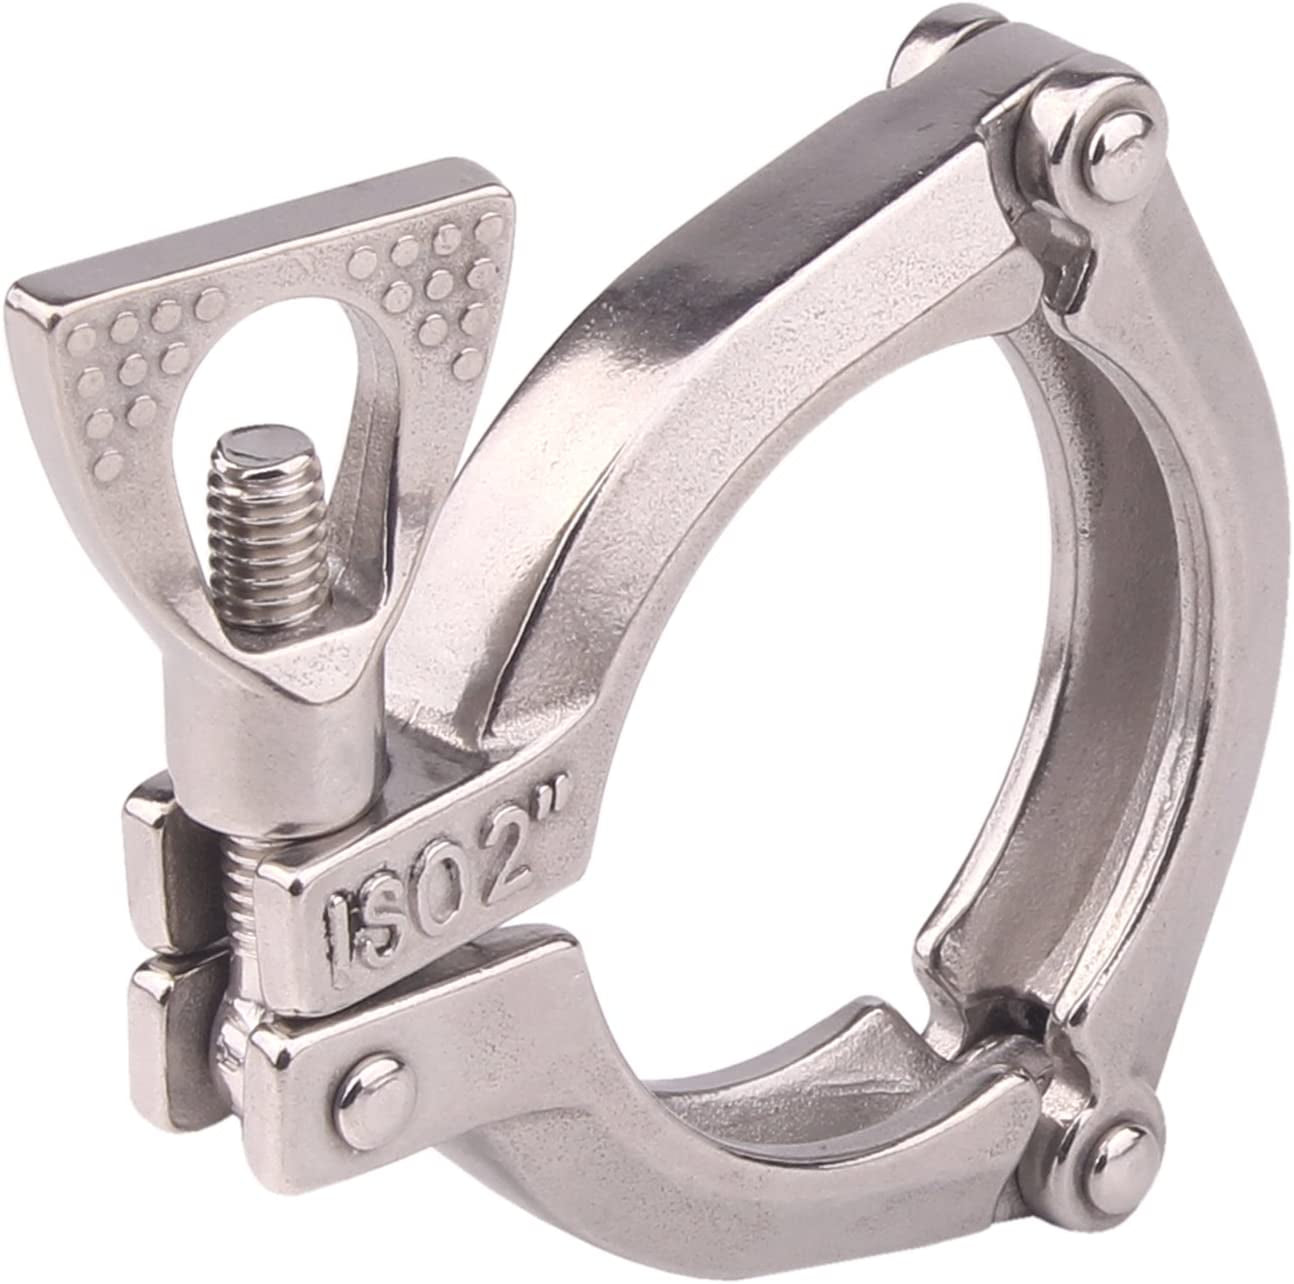 2 Inch Three Segment Sanitary Clamp Stainless Steel 304 Tri Clamp Clover ((Tri Clamp:2 Inch))